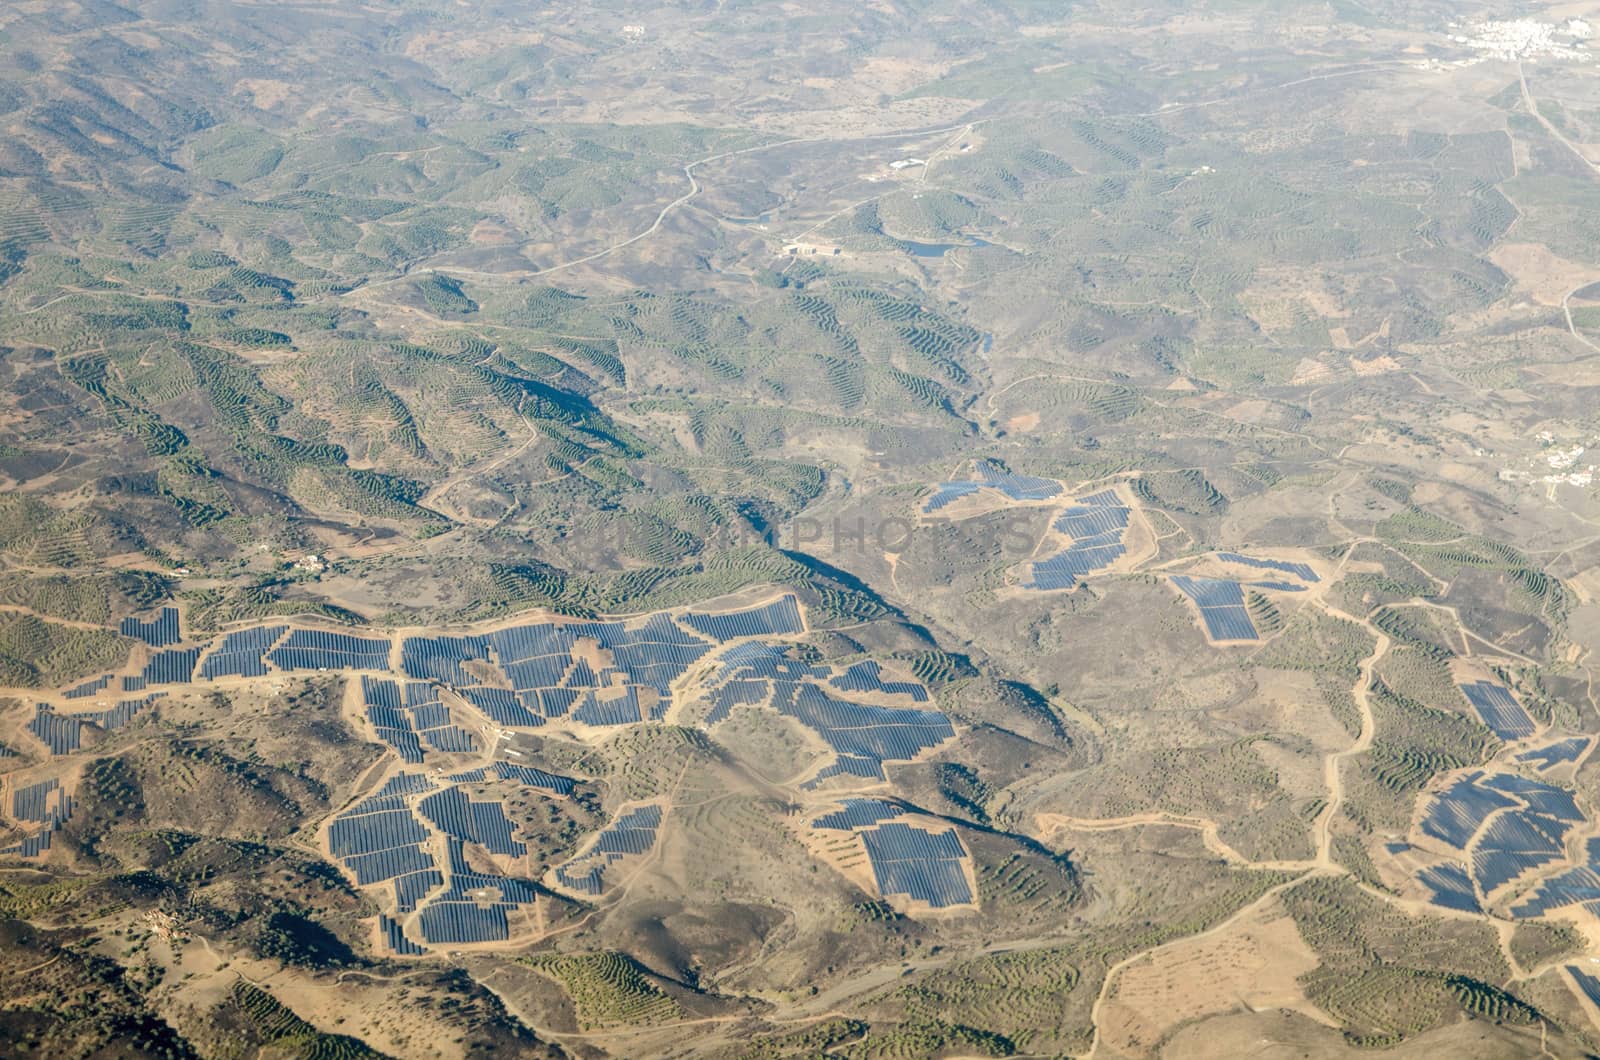 Aerial view of the many solar panels stretched across the countryside at Santa Justa in the Alcoutim region of Portugal.  